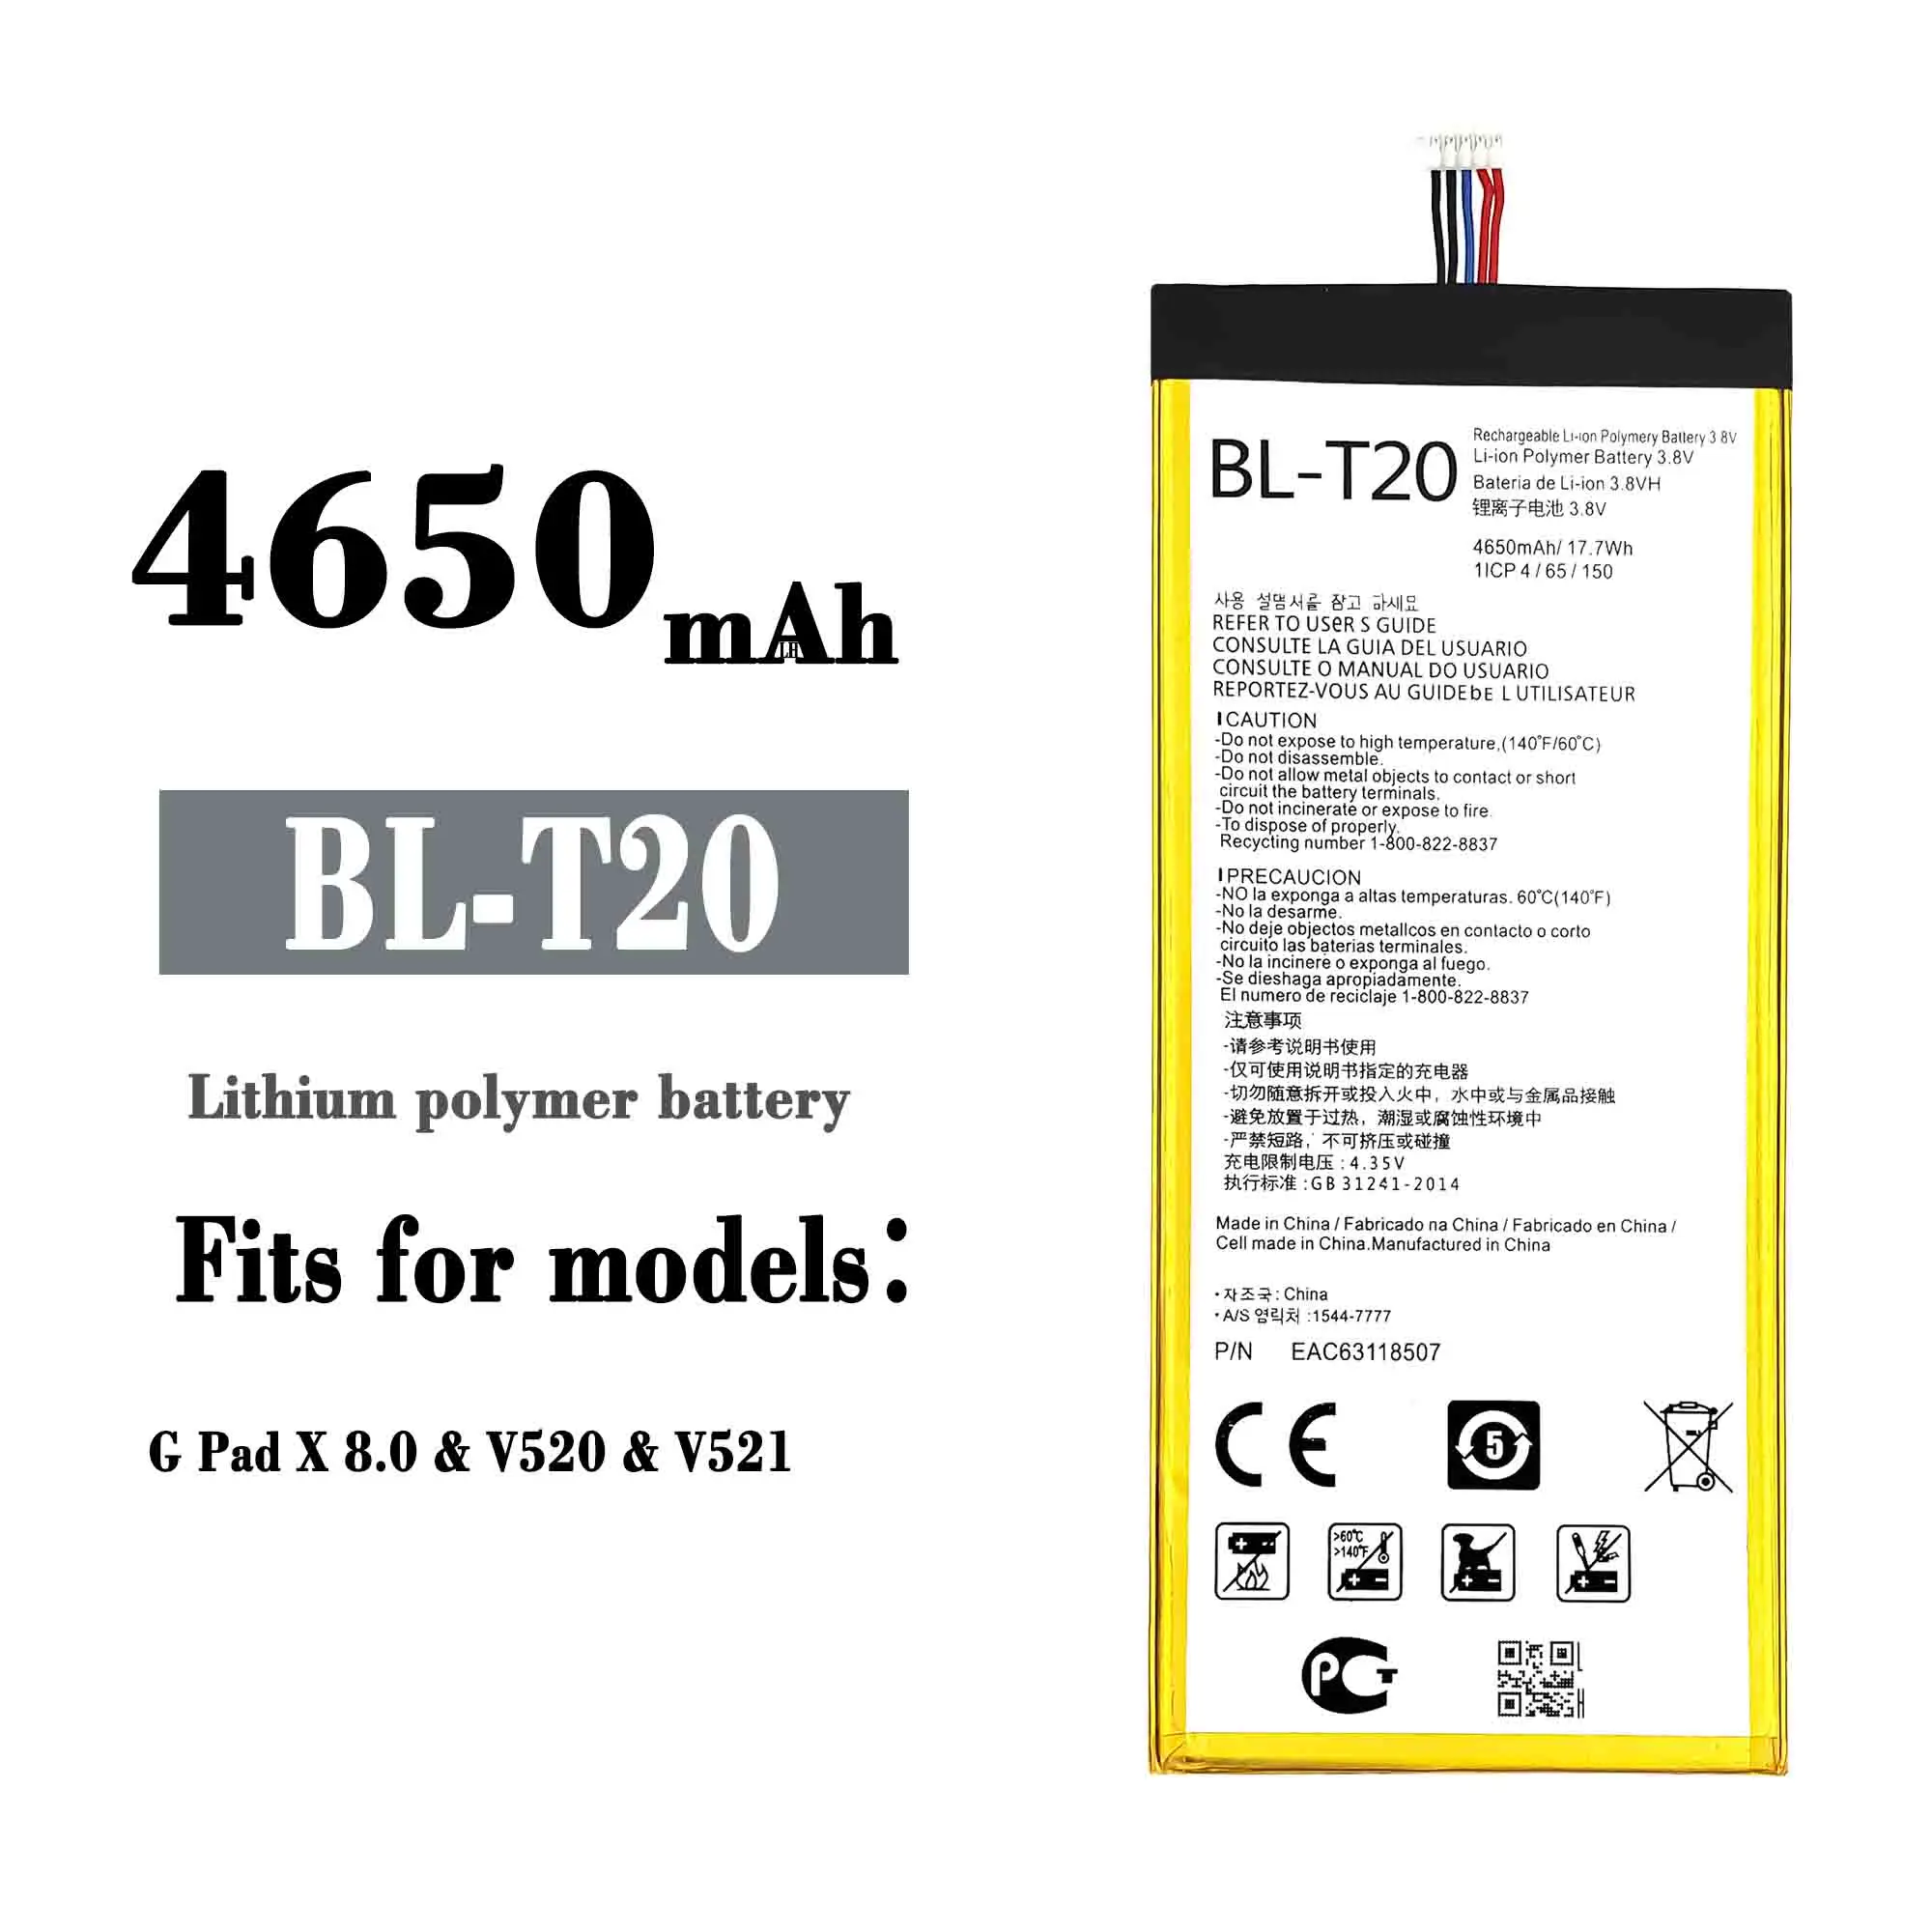 100% Genuine BL-T20 BL T20 Battery For LG G Pad X 8.0 V521 V525 4650mAh Table PC In Stock New Batteries With Tracking number